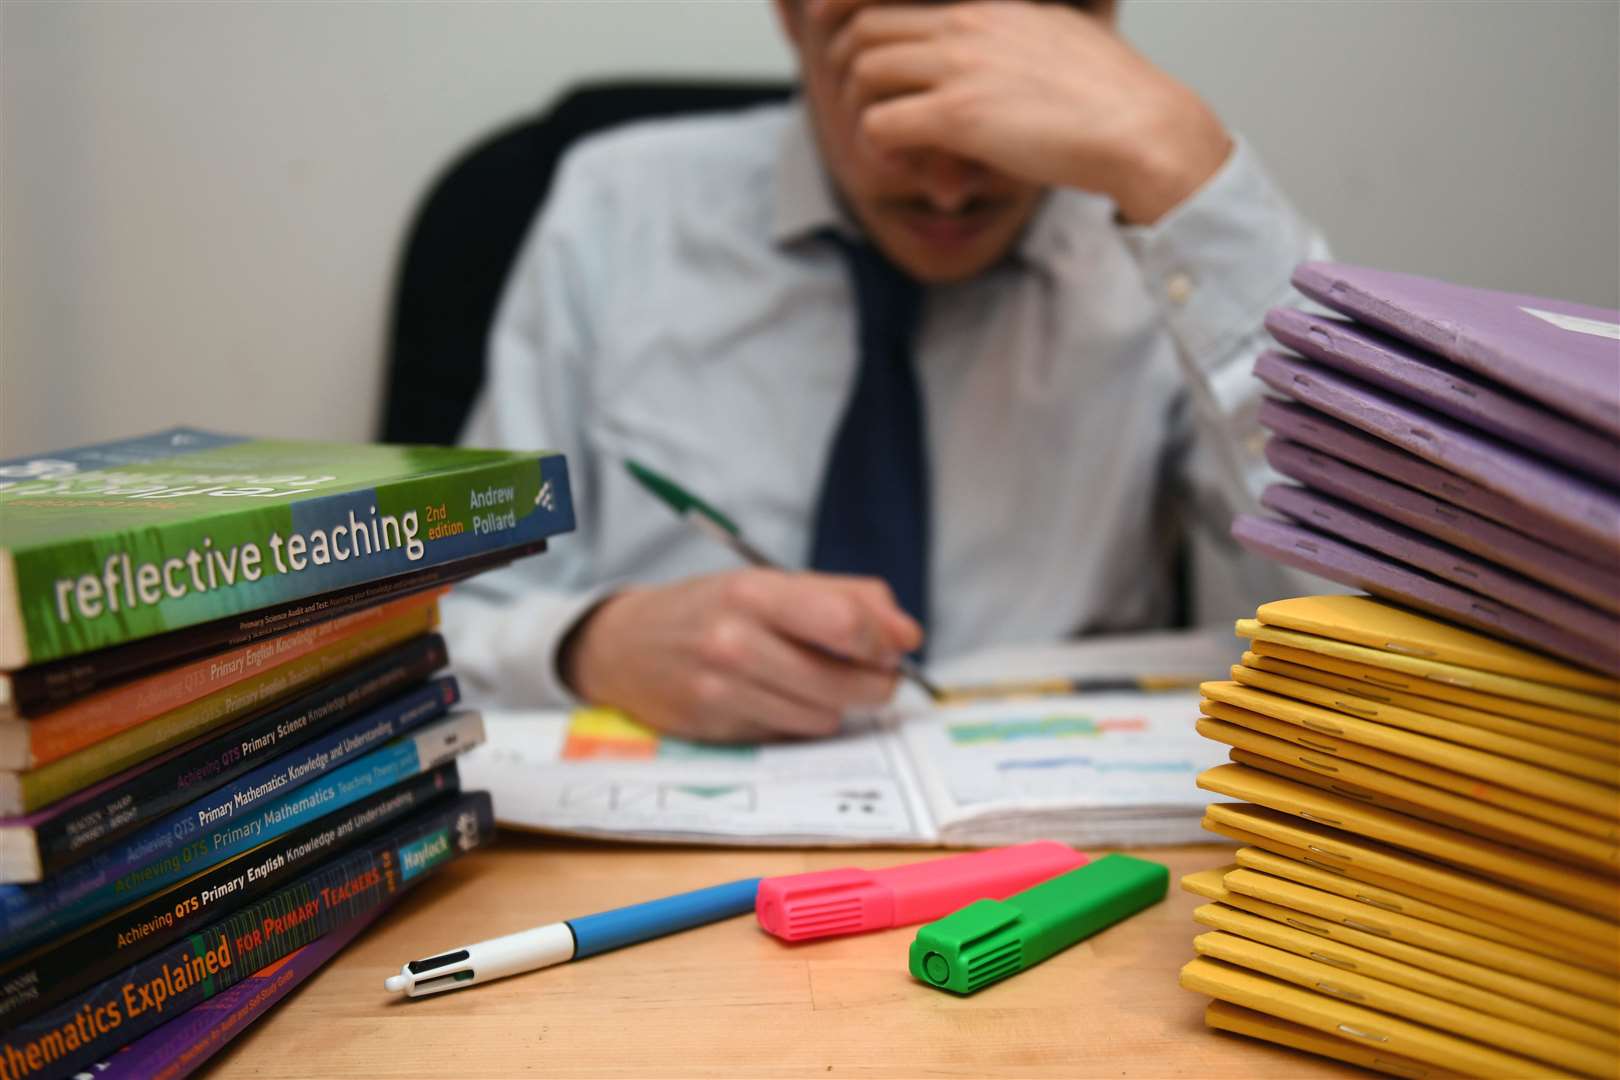 The NASUWT said 91% of teachers are experiencing ever increasing workloads forcing 73% of teachers to seriously consider leaving their jobs (PA)